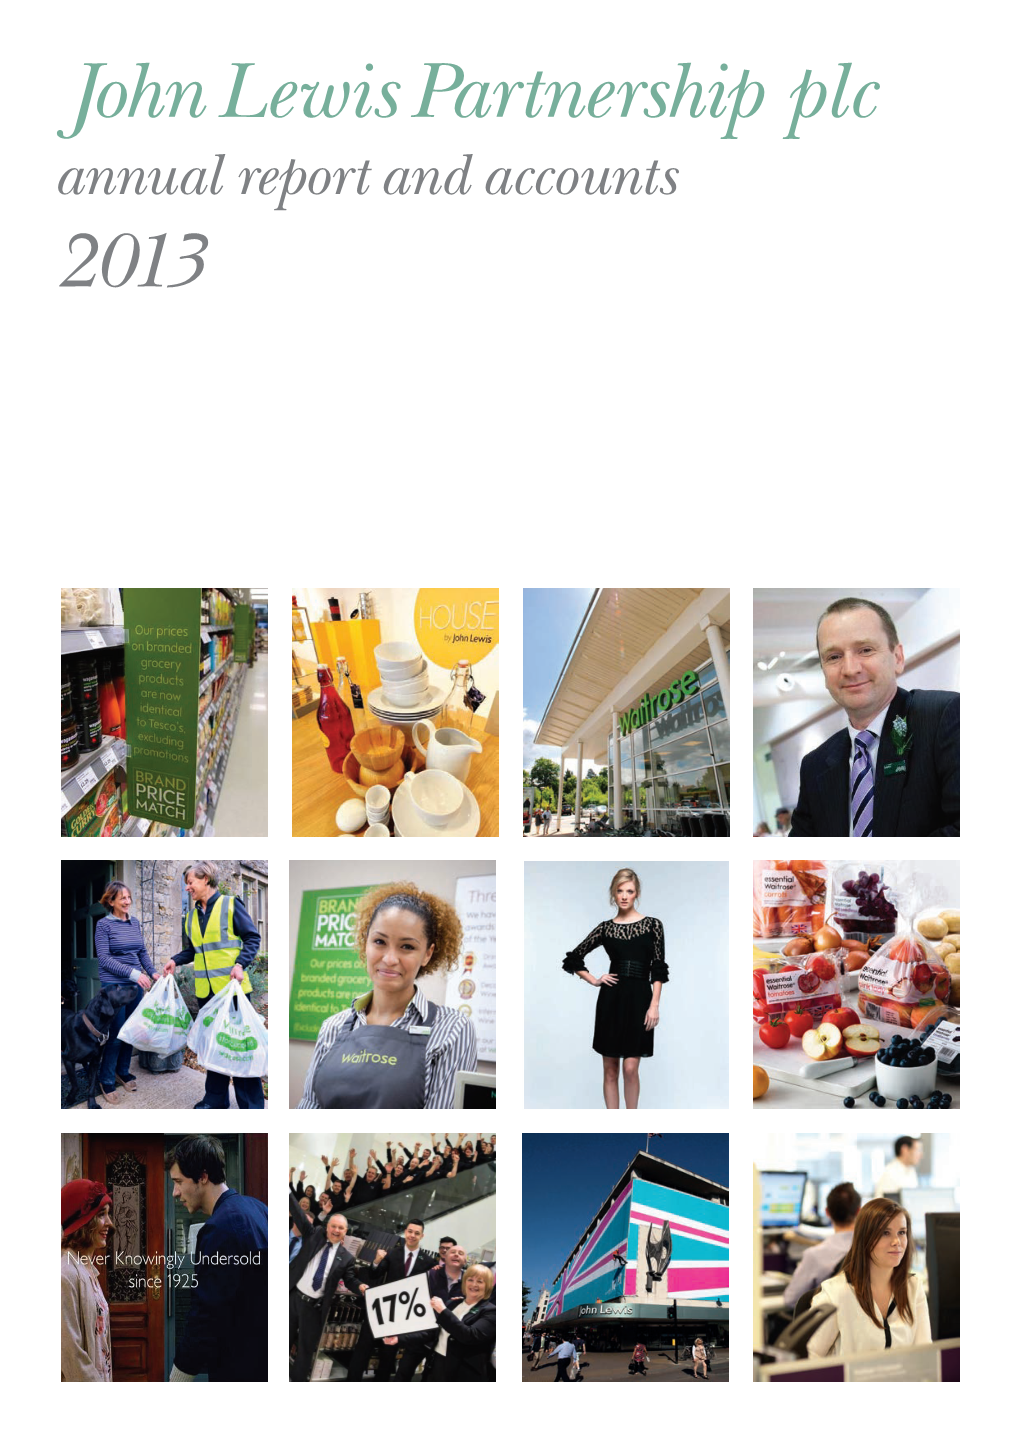 John Lewis Partnership Plc Annual Report and Accounts 2013